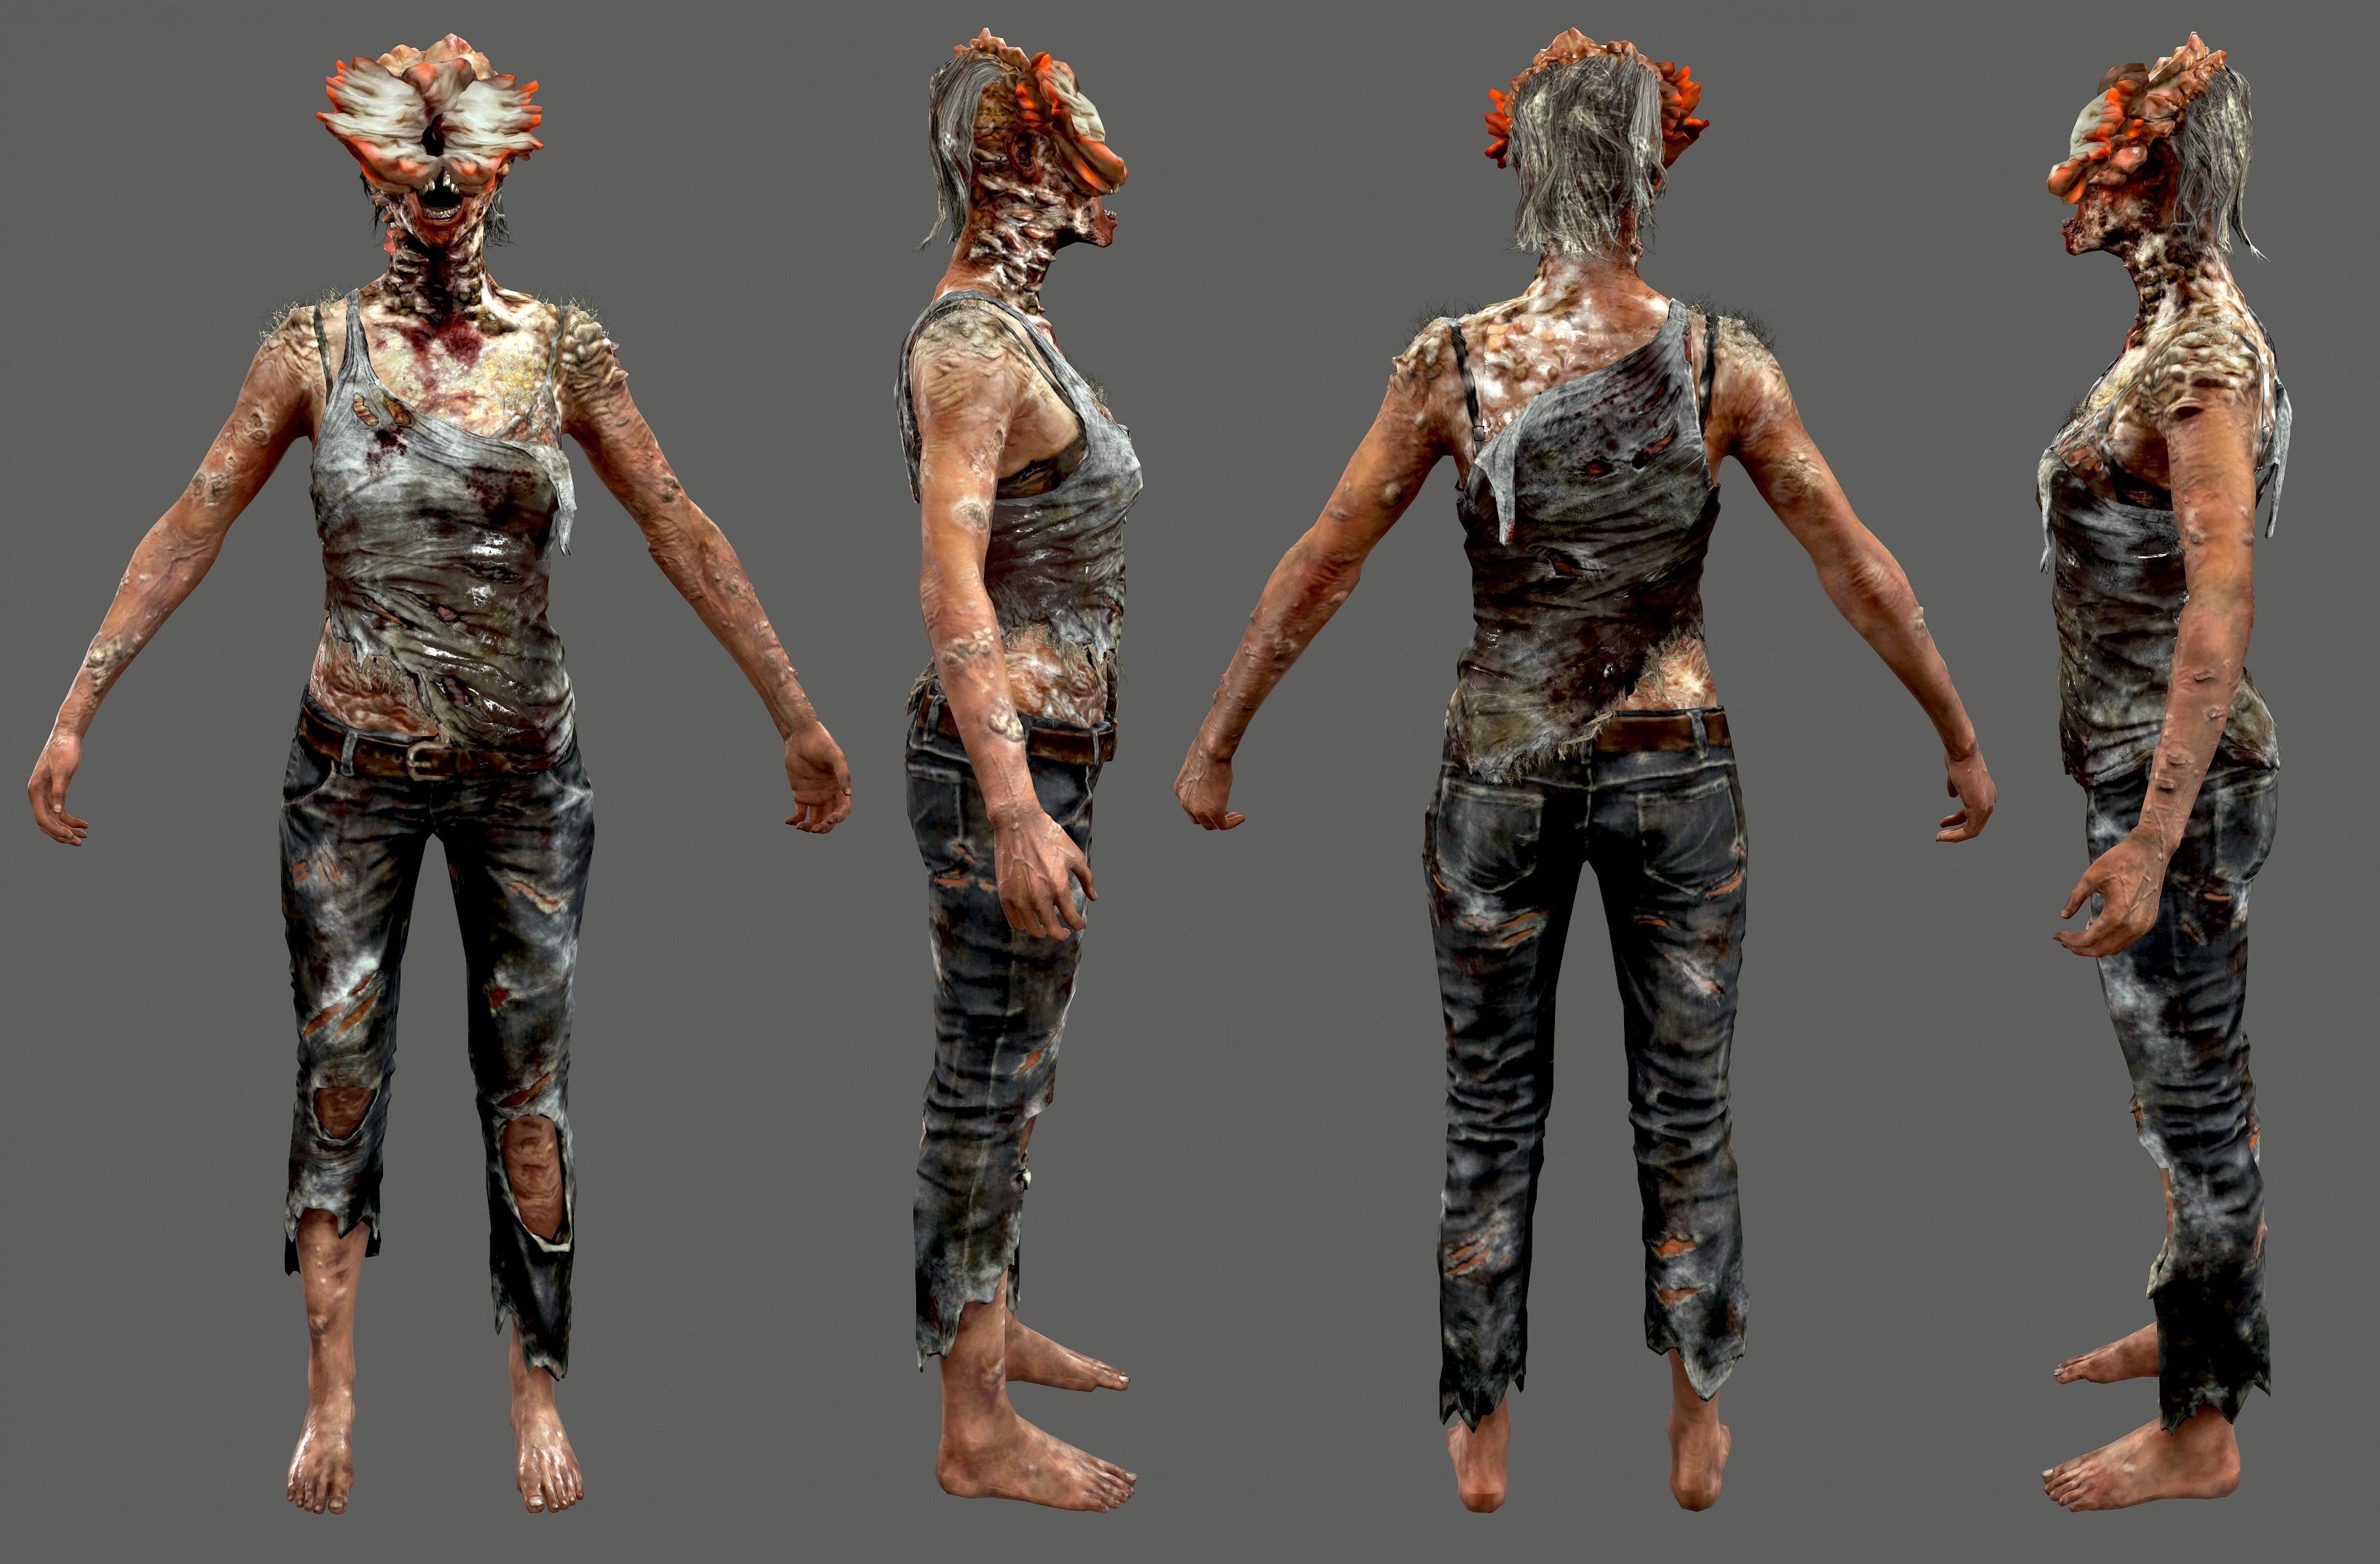 Clickers from The Last of Us